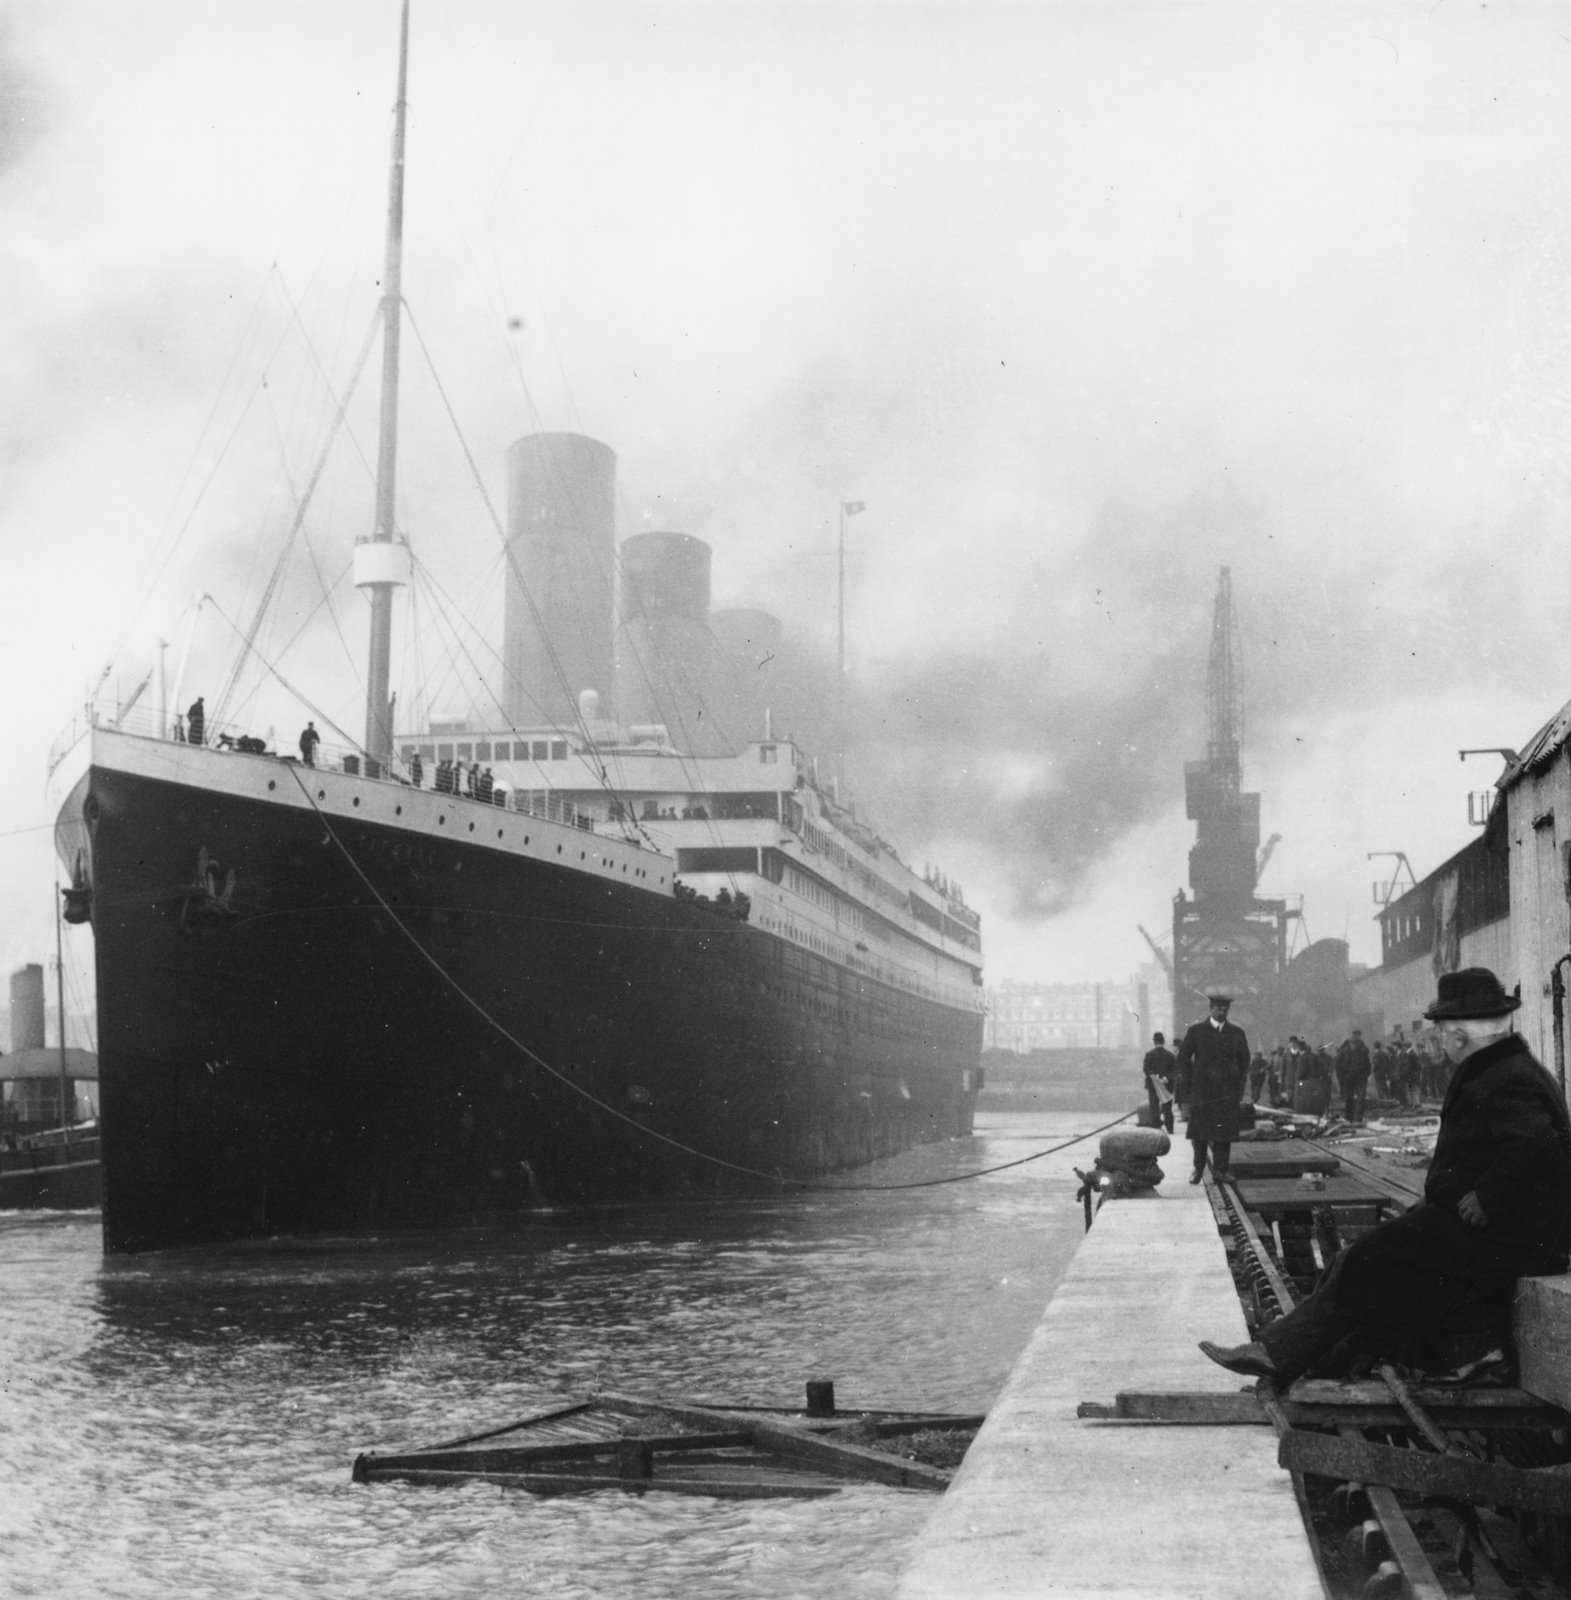 More than 200,000 Titanic-related records have been published online to mark the 100th anniversary from the ship's sinking